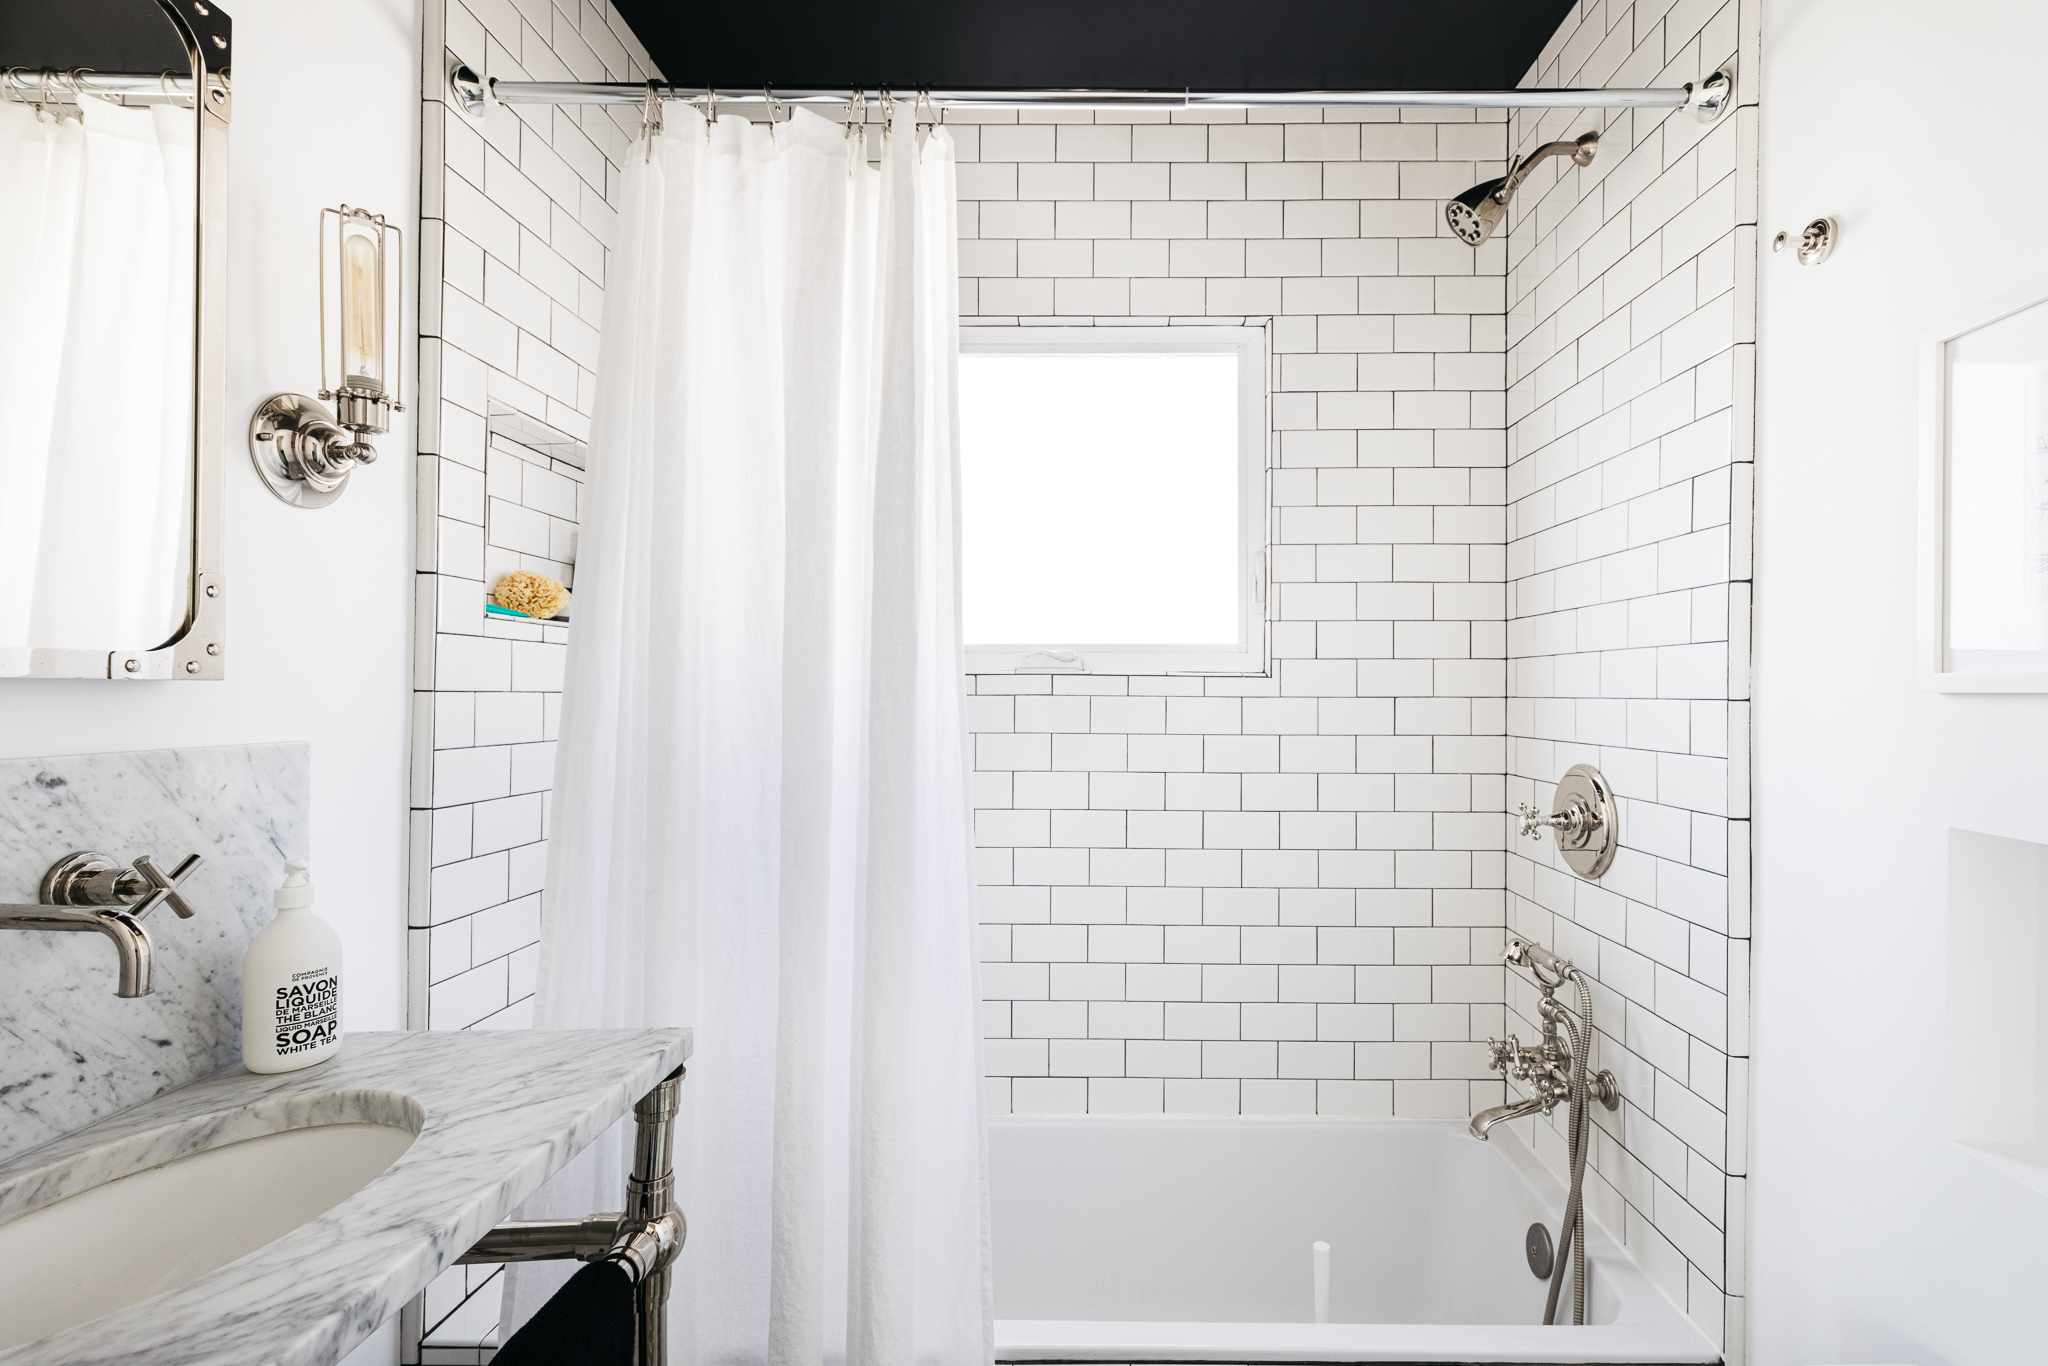 Build a Small but Exceptional Shower